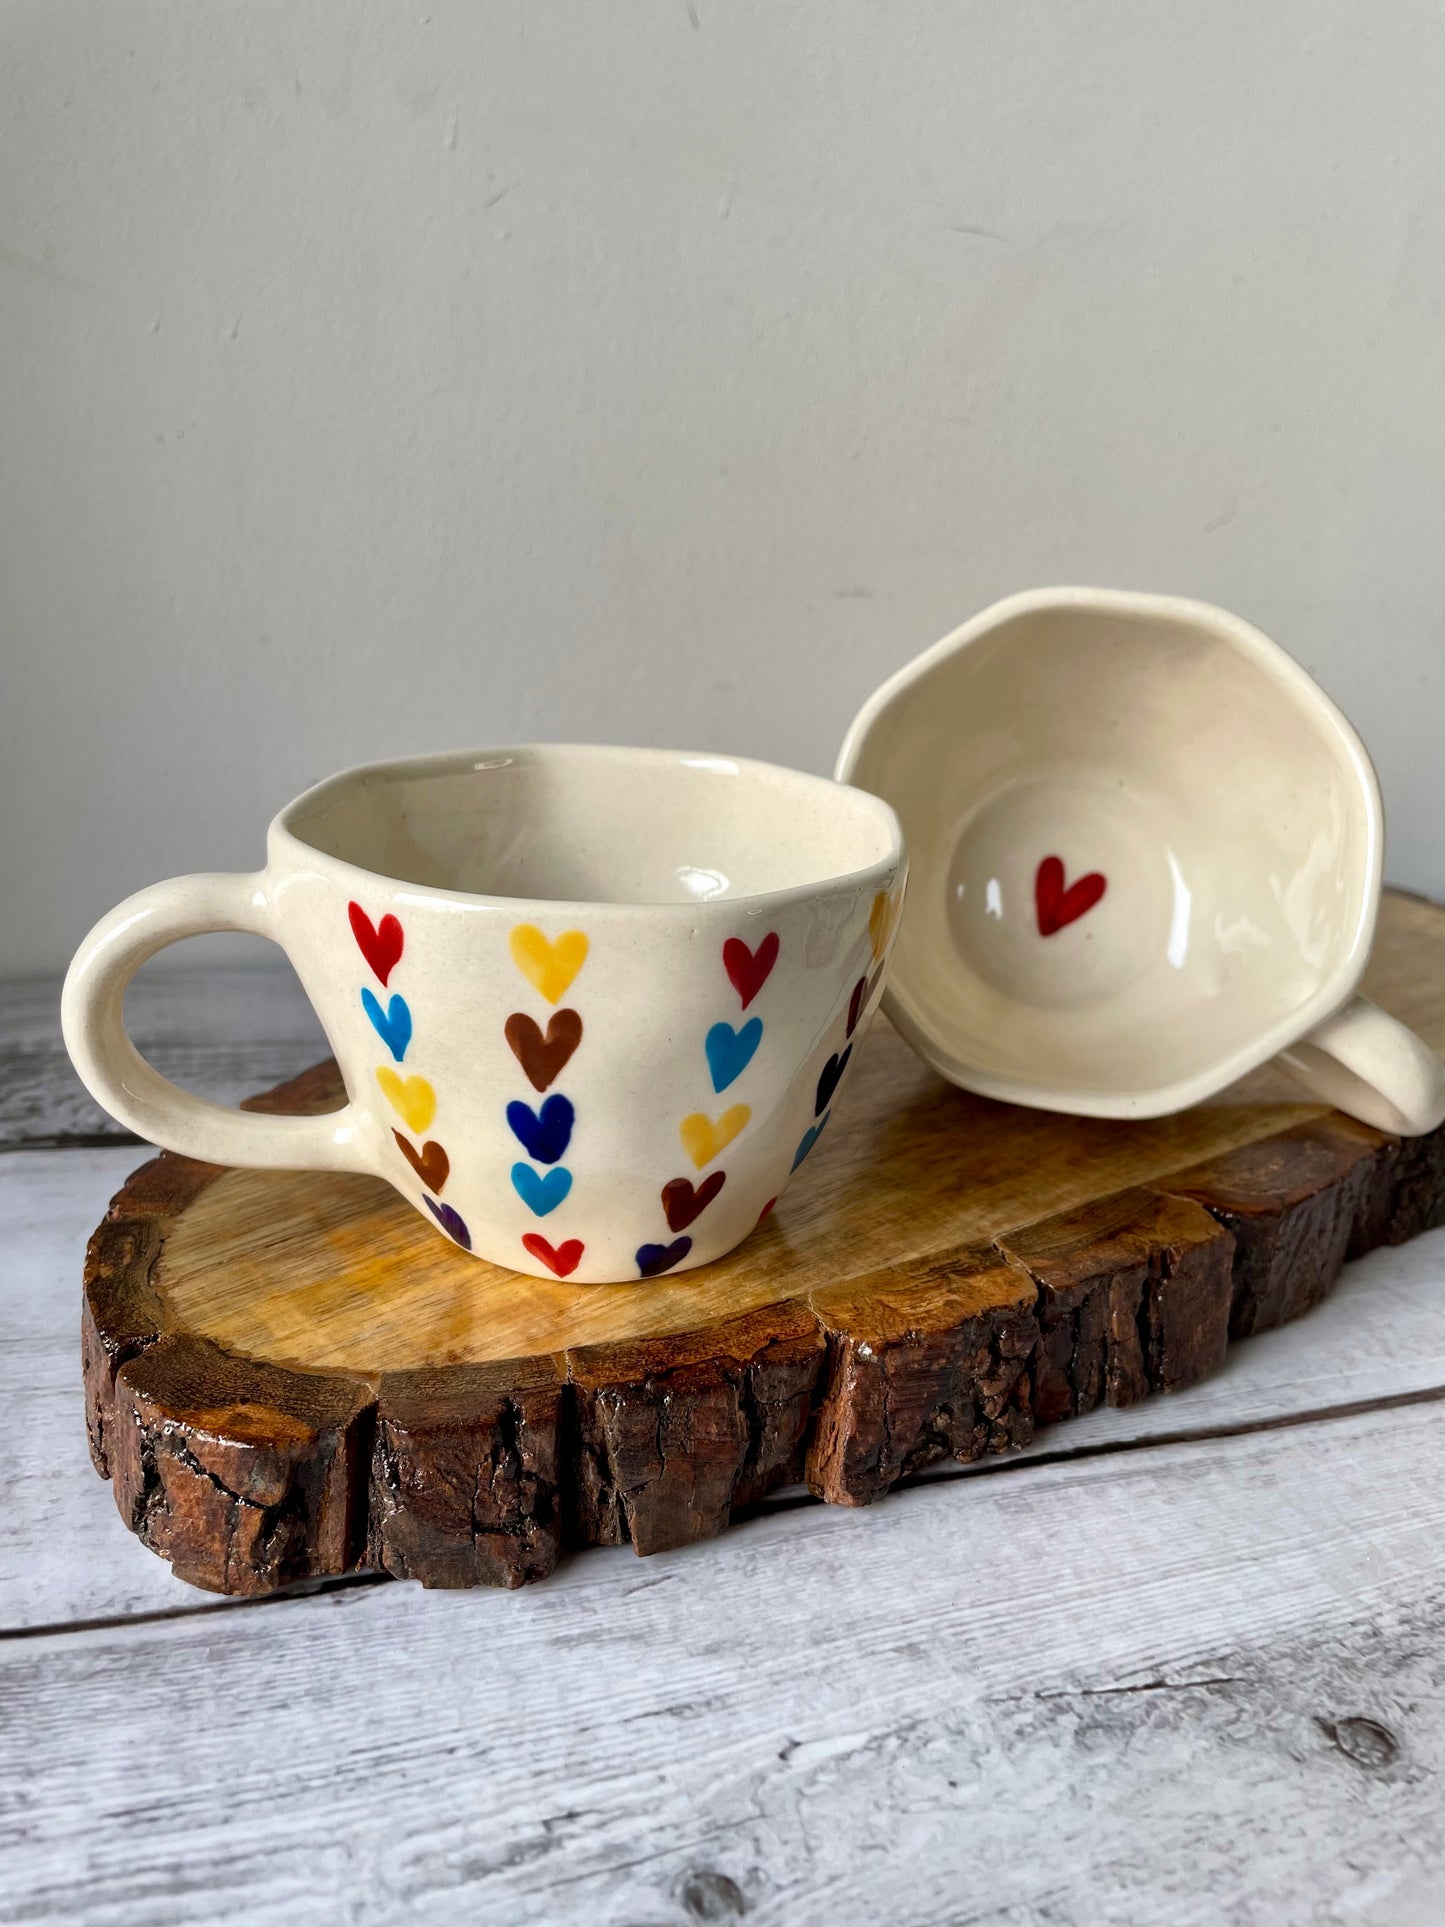 Hand-painted cups